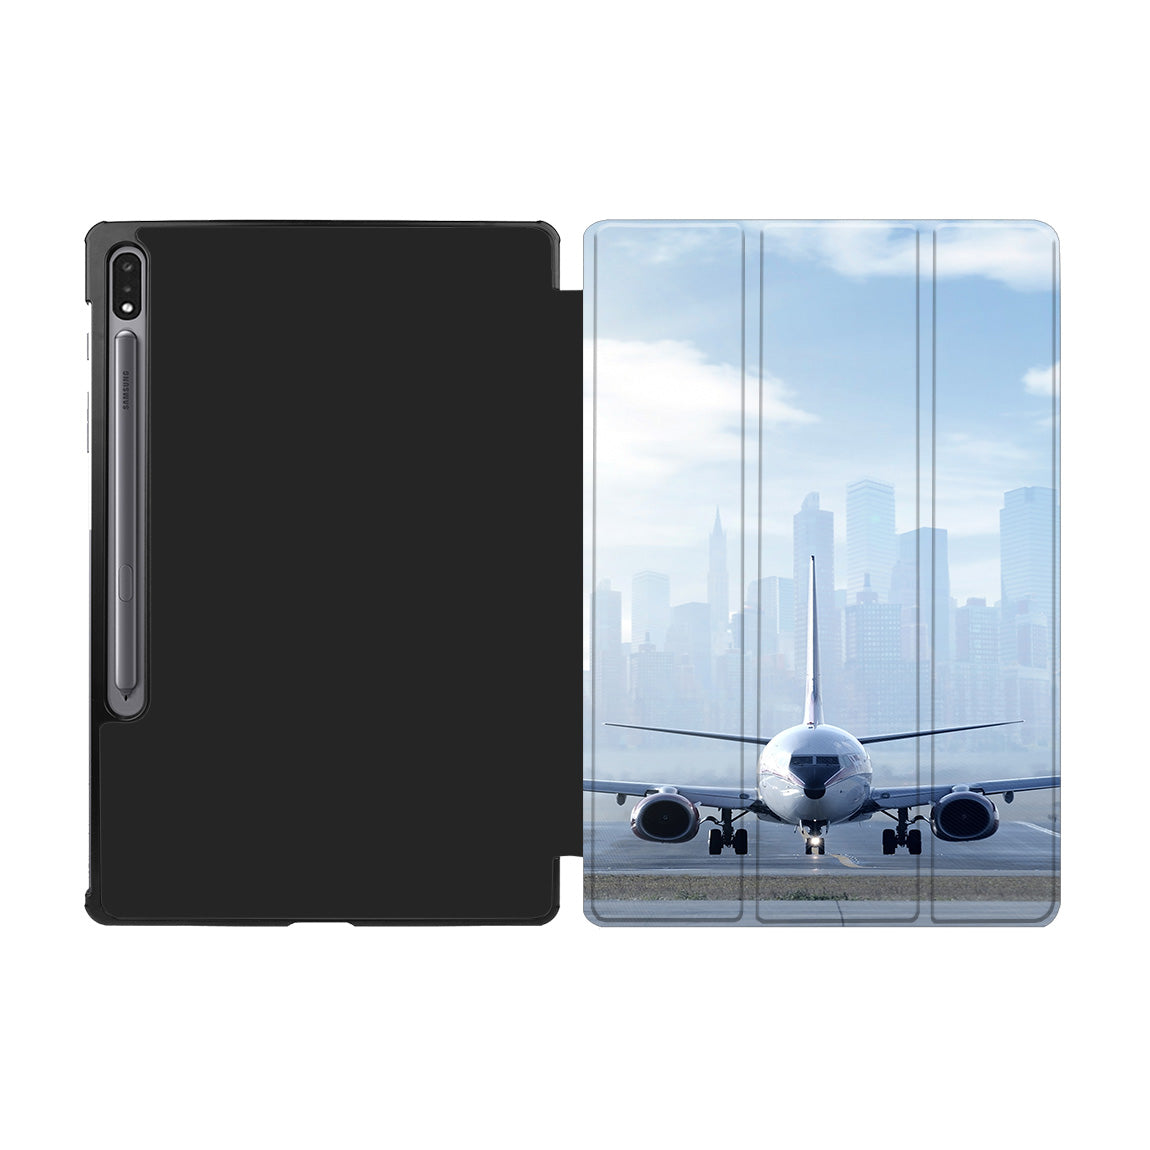 Boeing 737 & City View Behind copy Designed Samsung Tablet Cases